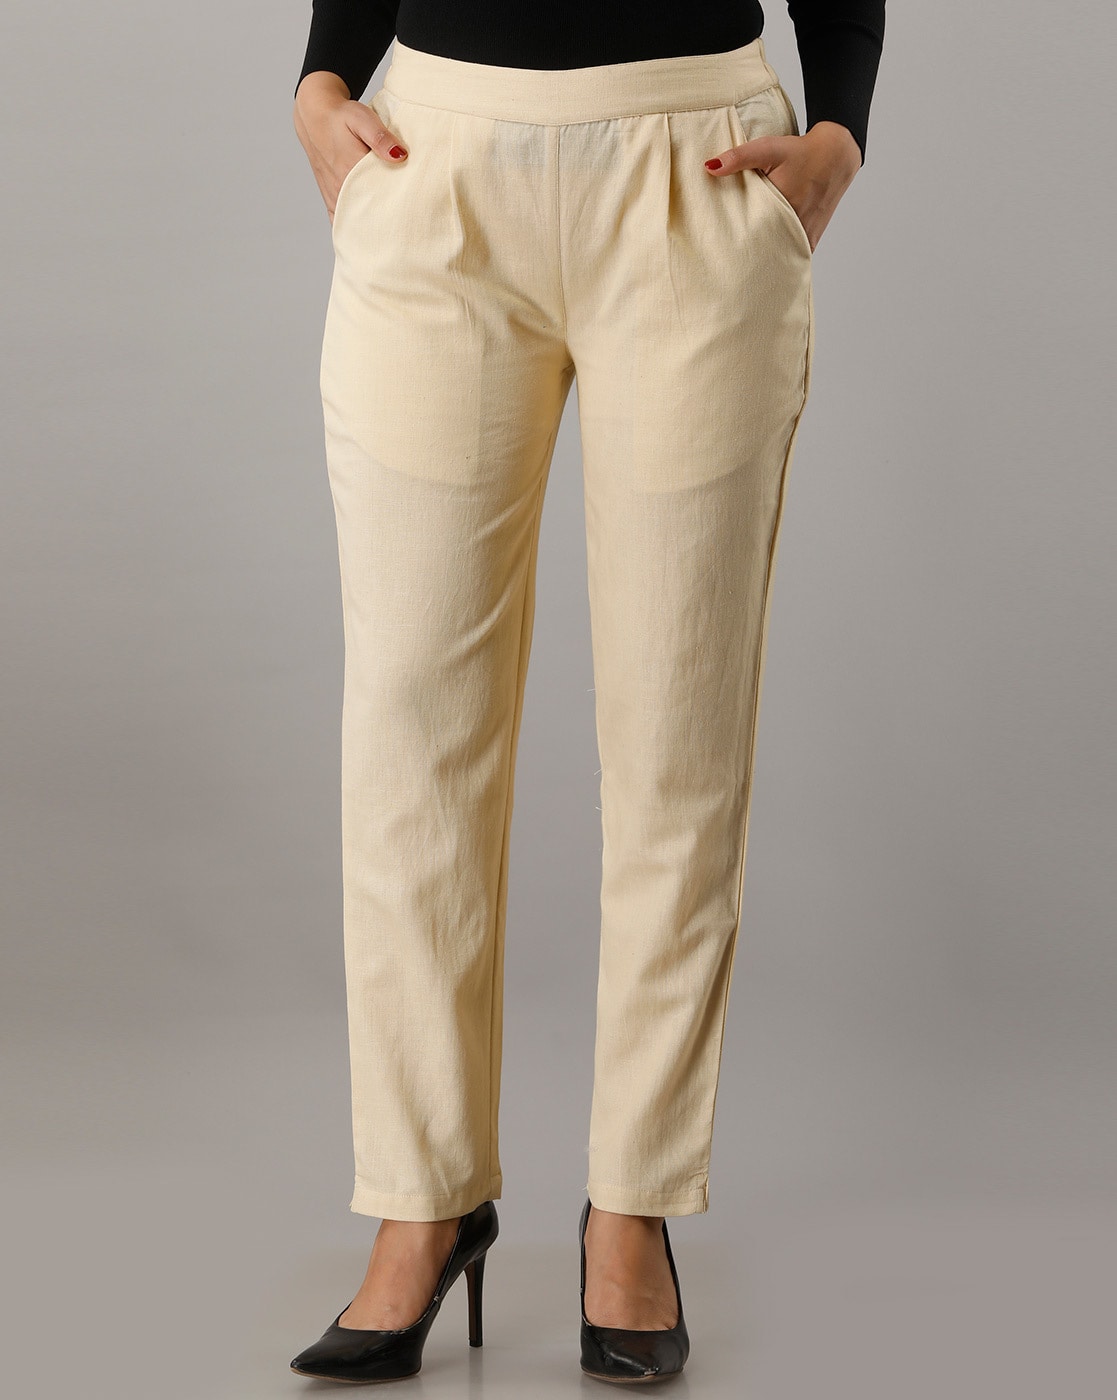 Buy Cream Trousers  Pants for Women by RB Online  Ajiocom